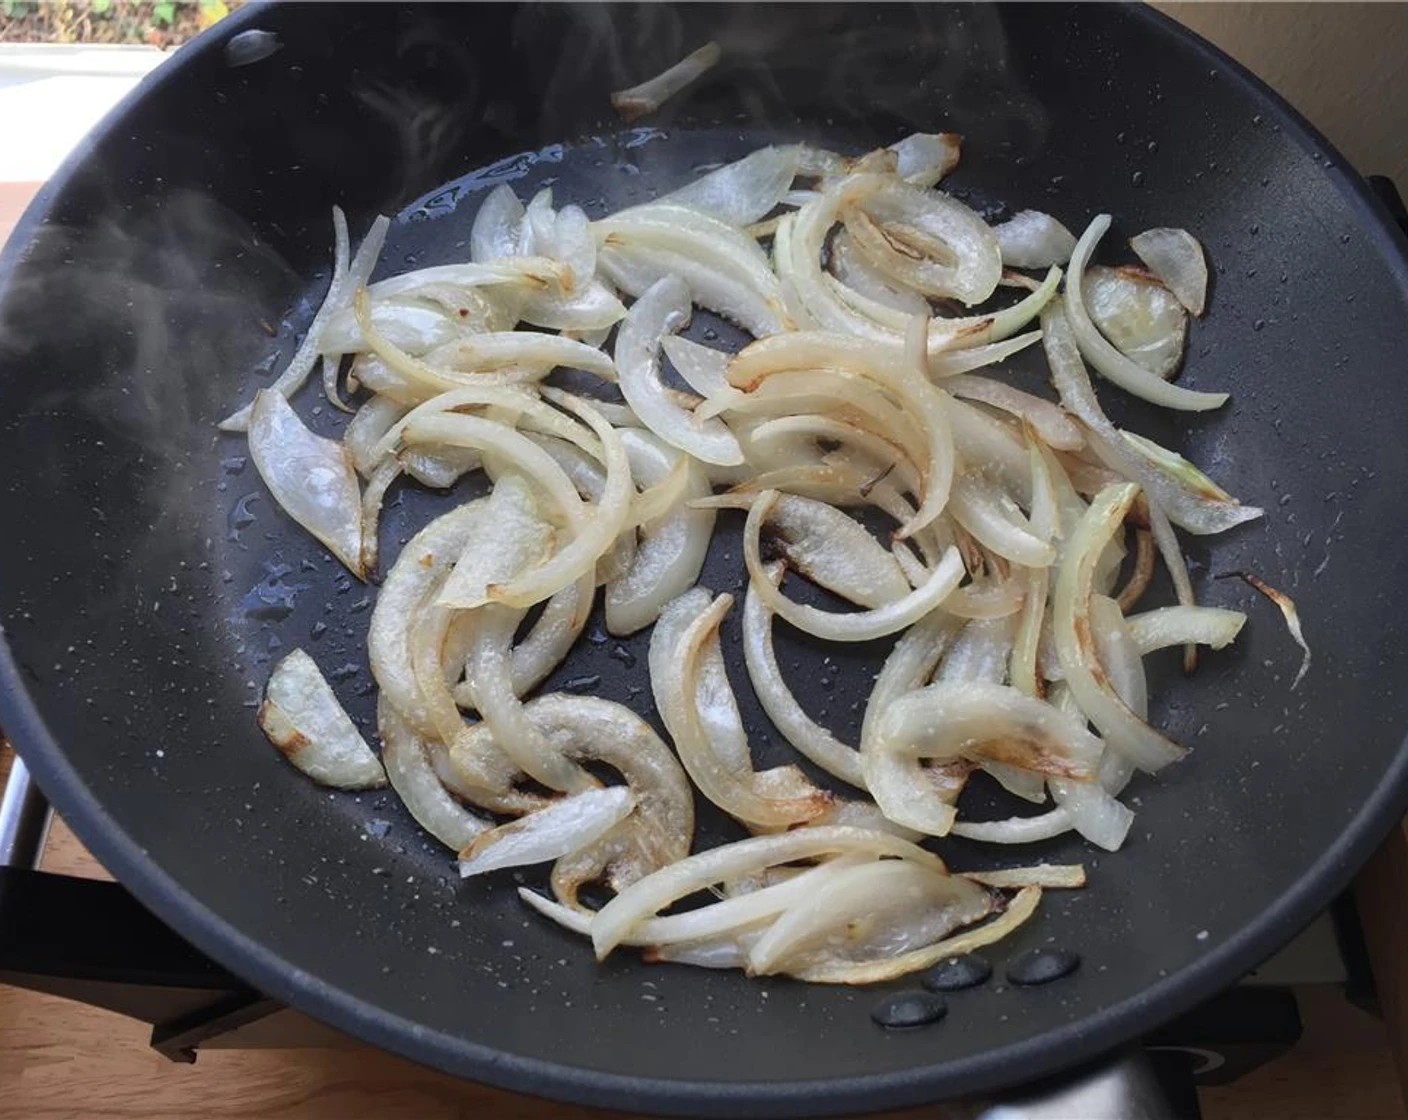 step 3 To a saute pan over medium-high heat, add the Olive Oil (1 tsp), and once shimmering, add the sliced onion. Toss a few times for 4-5 minutes to get some color on them. If the pan seems too hot, lower to medium.